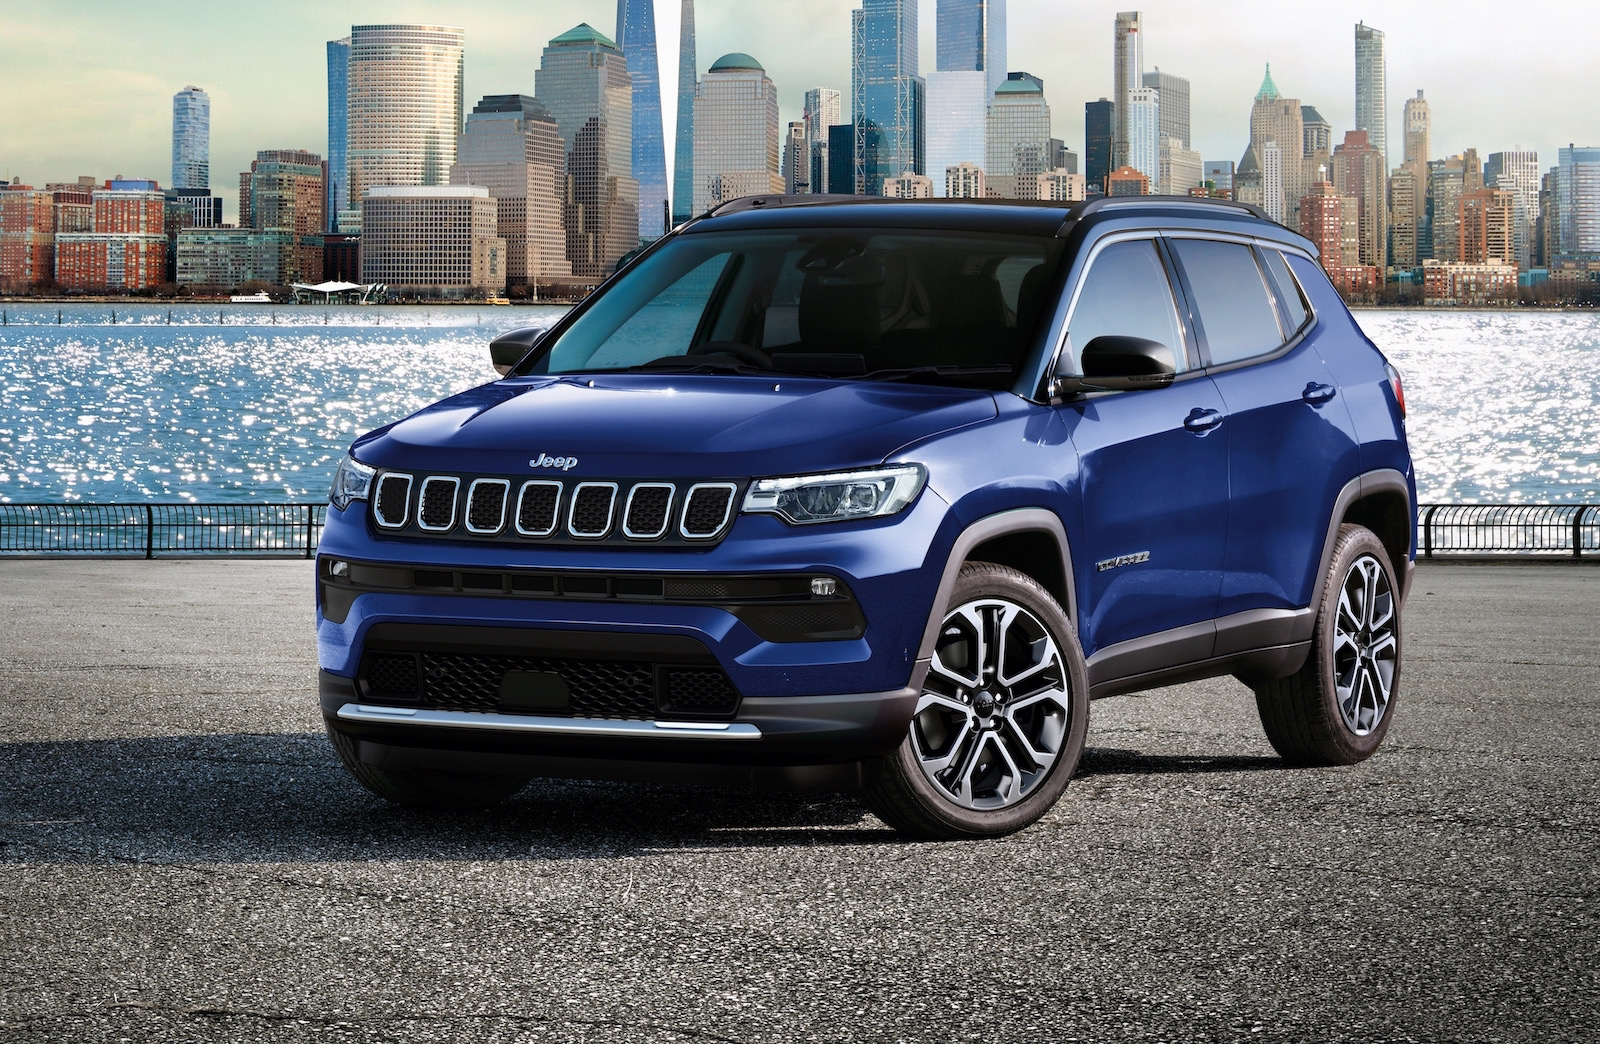 2021 Jeep Compass on sale in Australia from $37,950